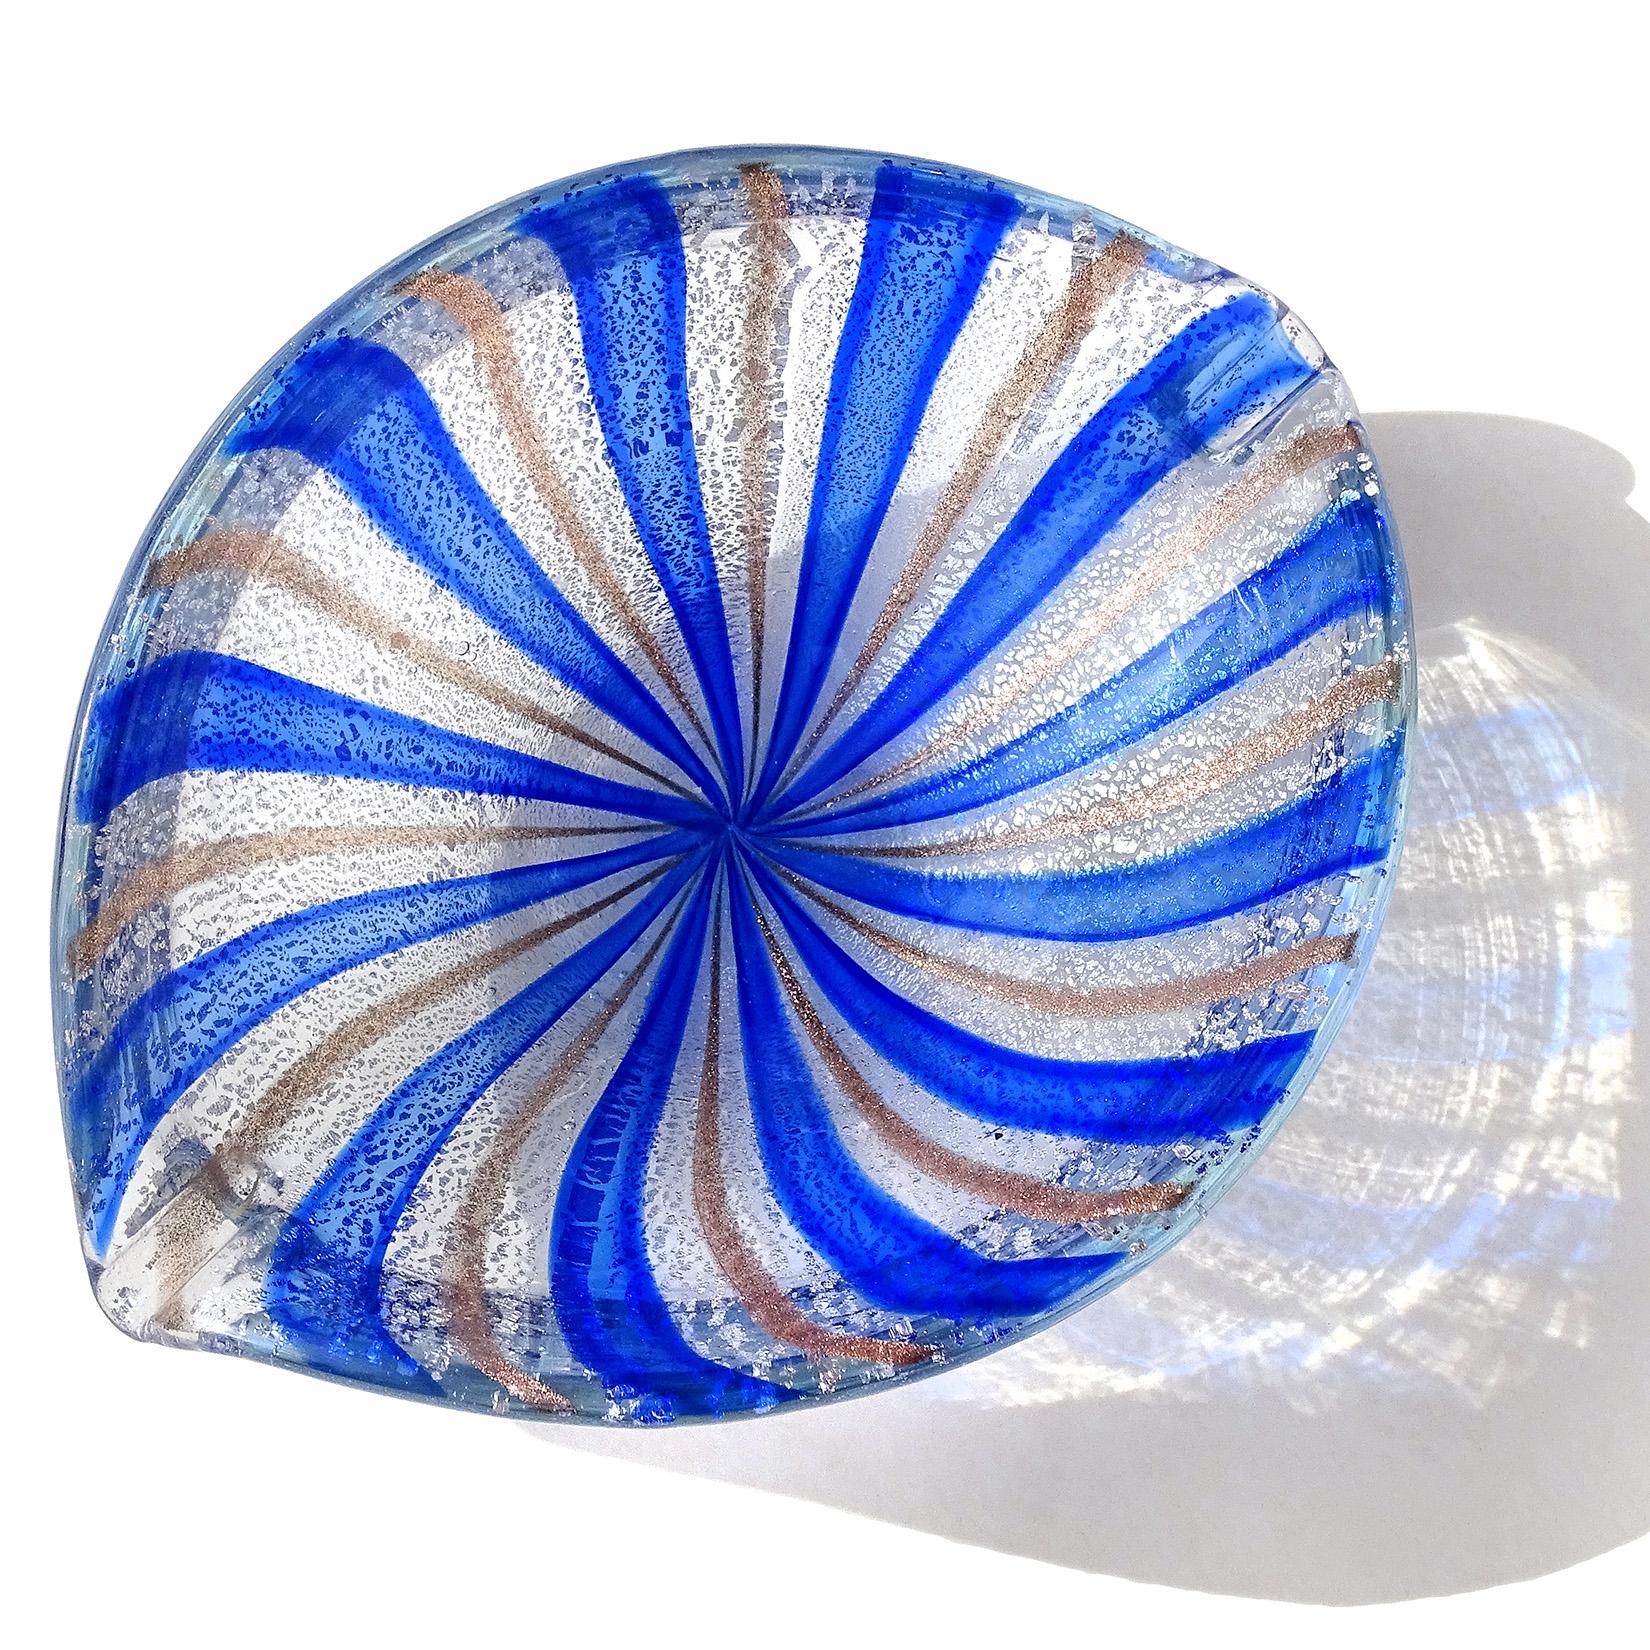 Beautiful vintage Murano hand blown blue, copper aventurine and silver flecks Italian art glass bowl. Documented to the A.Ve.M. (Arte Vetraria Muranese) company. The piece has alternating bands of cobalt blue and aventurine over silver leaf. It has